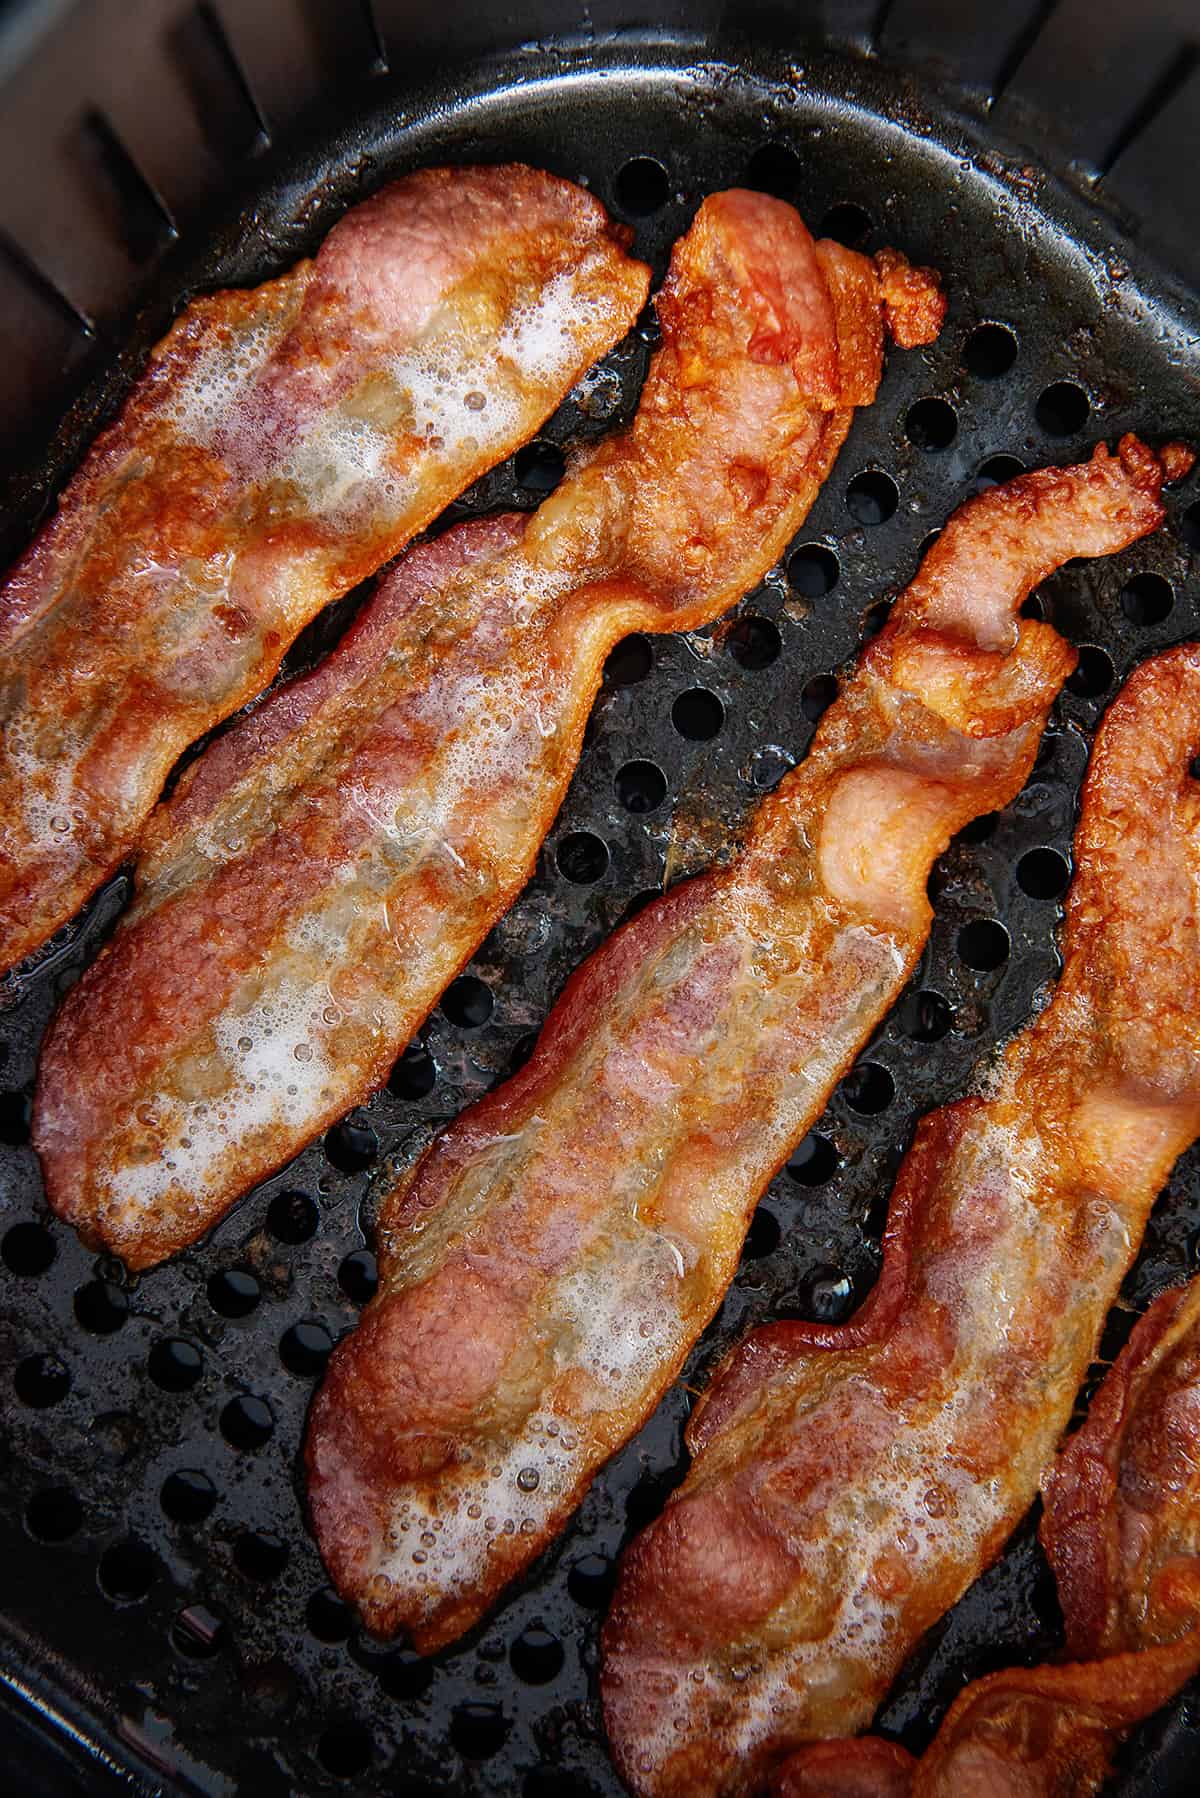 A top down view of an air fryer basket containing air fried bacon.